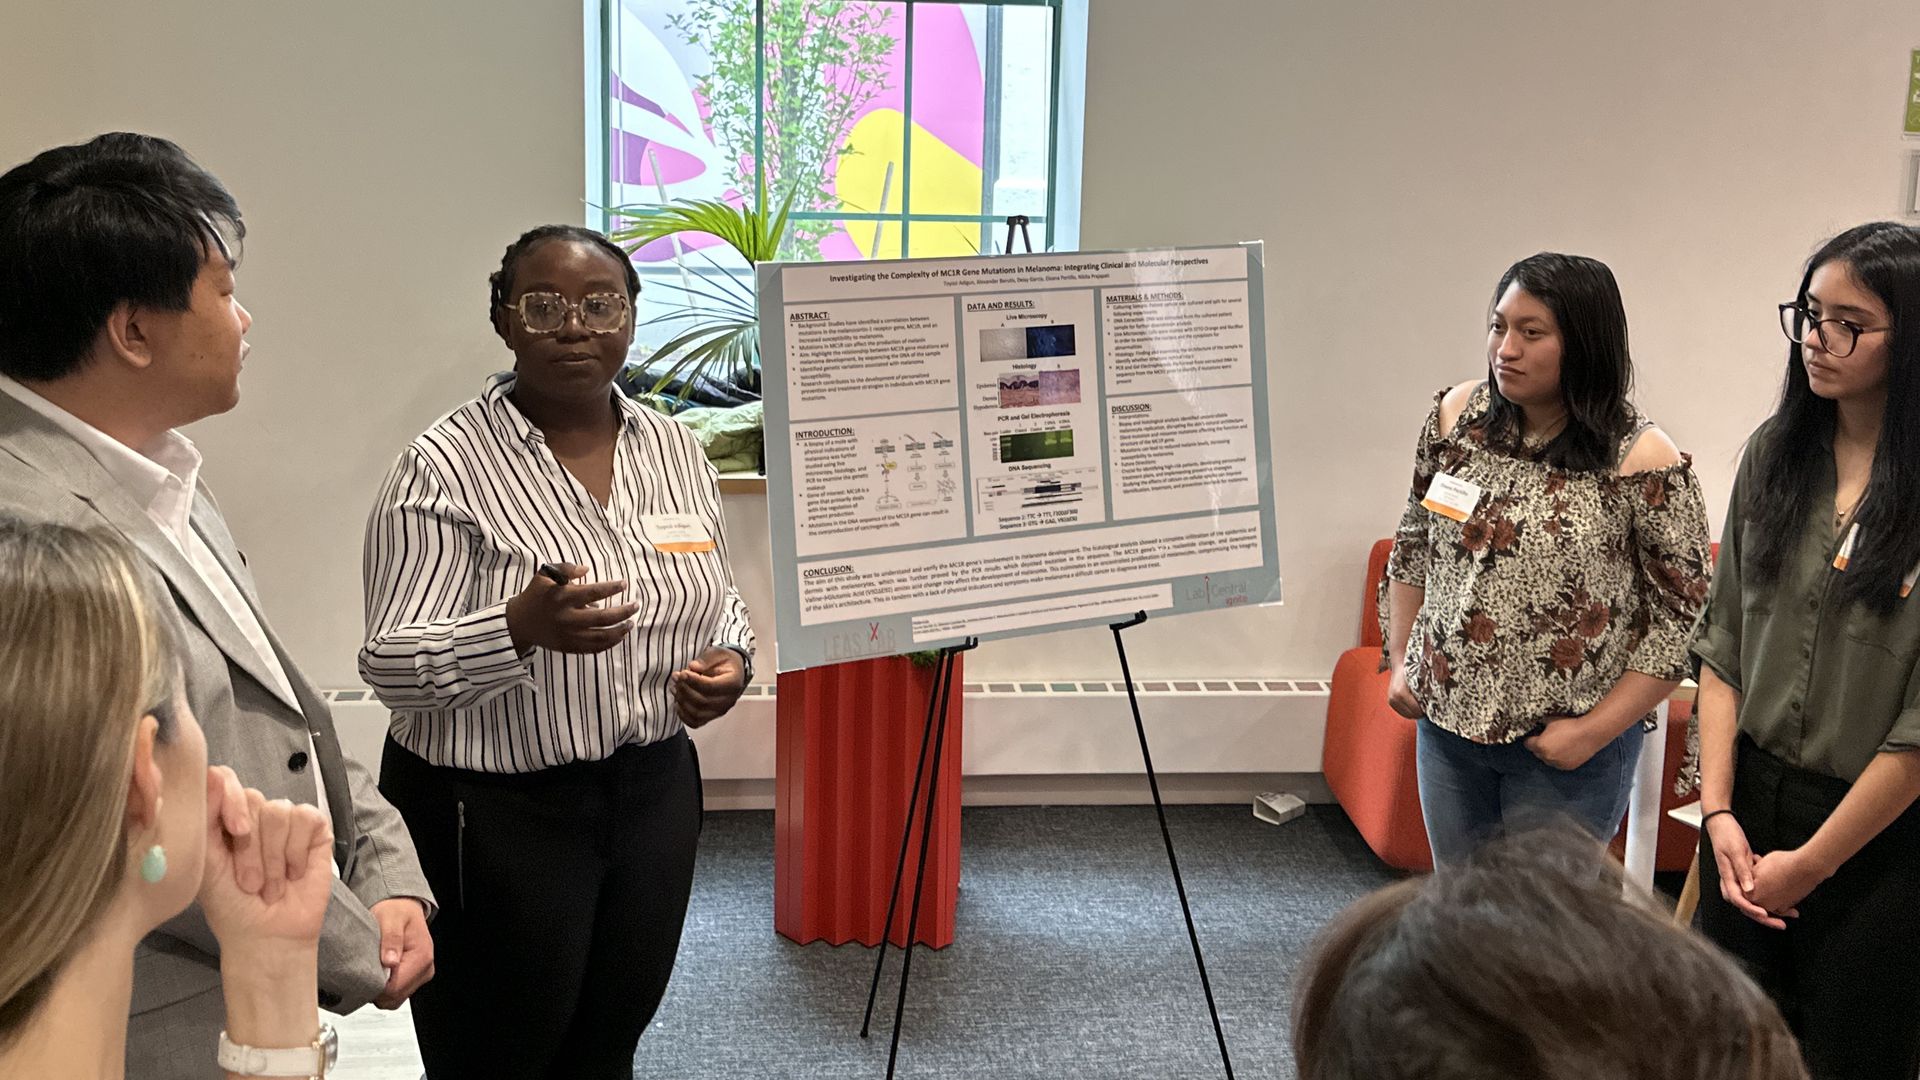 Toyosi Adigun, center left, is presenting the findings of her group's experiment to prospective employers. The group is part of the latest CareerForge job training cohort.